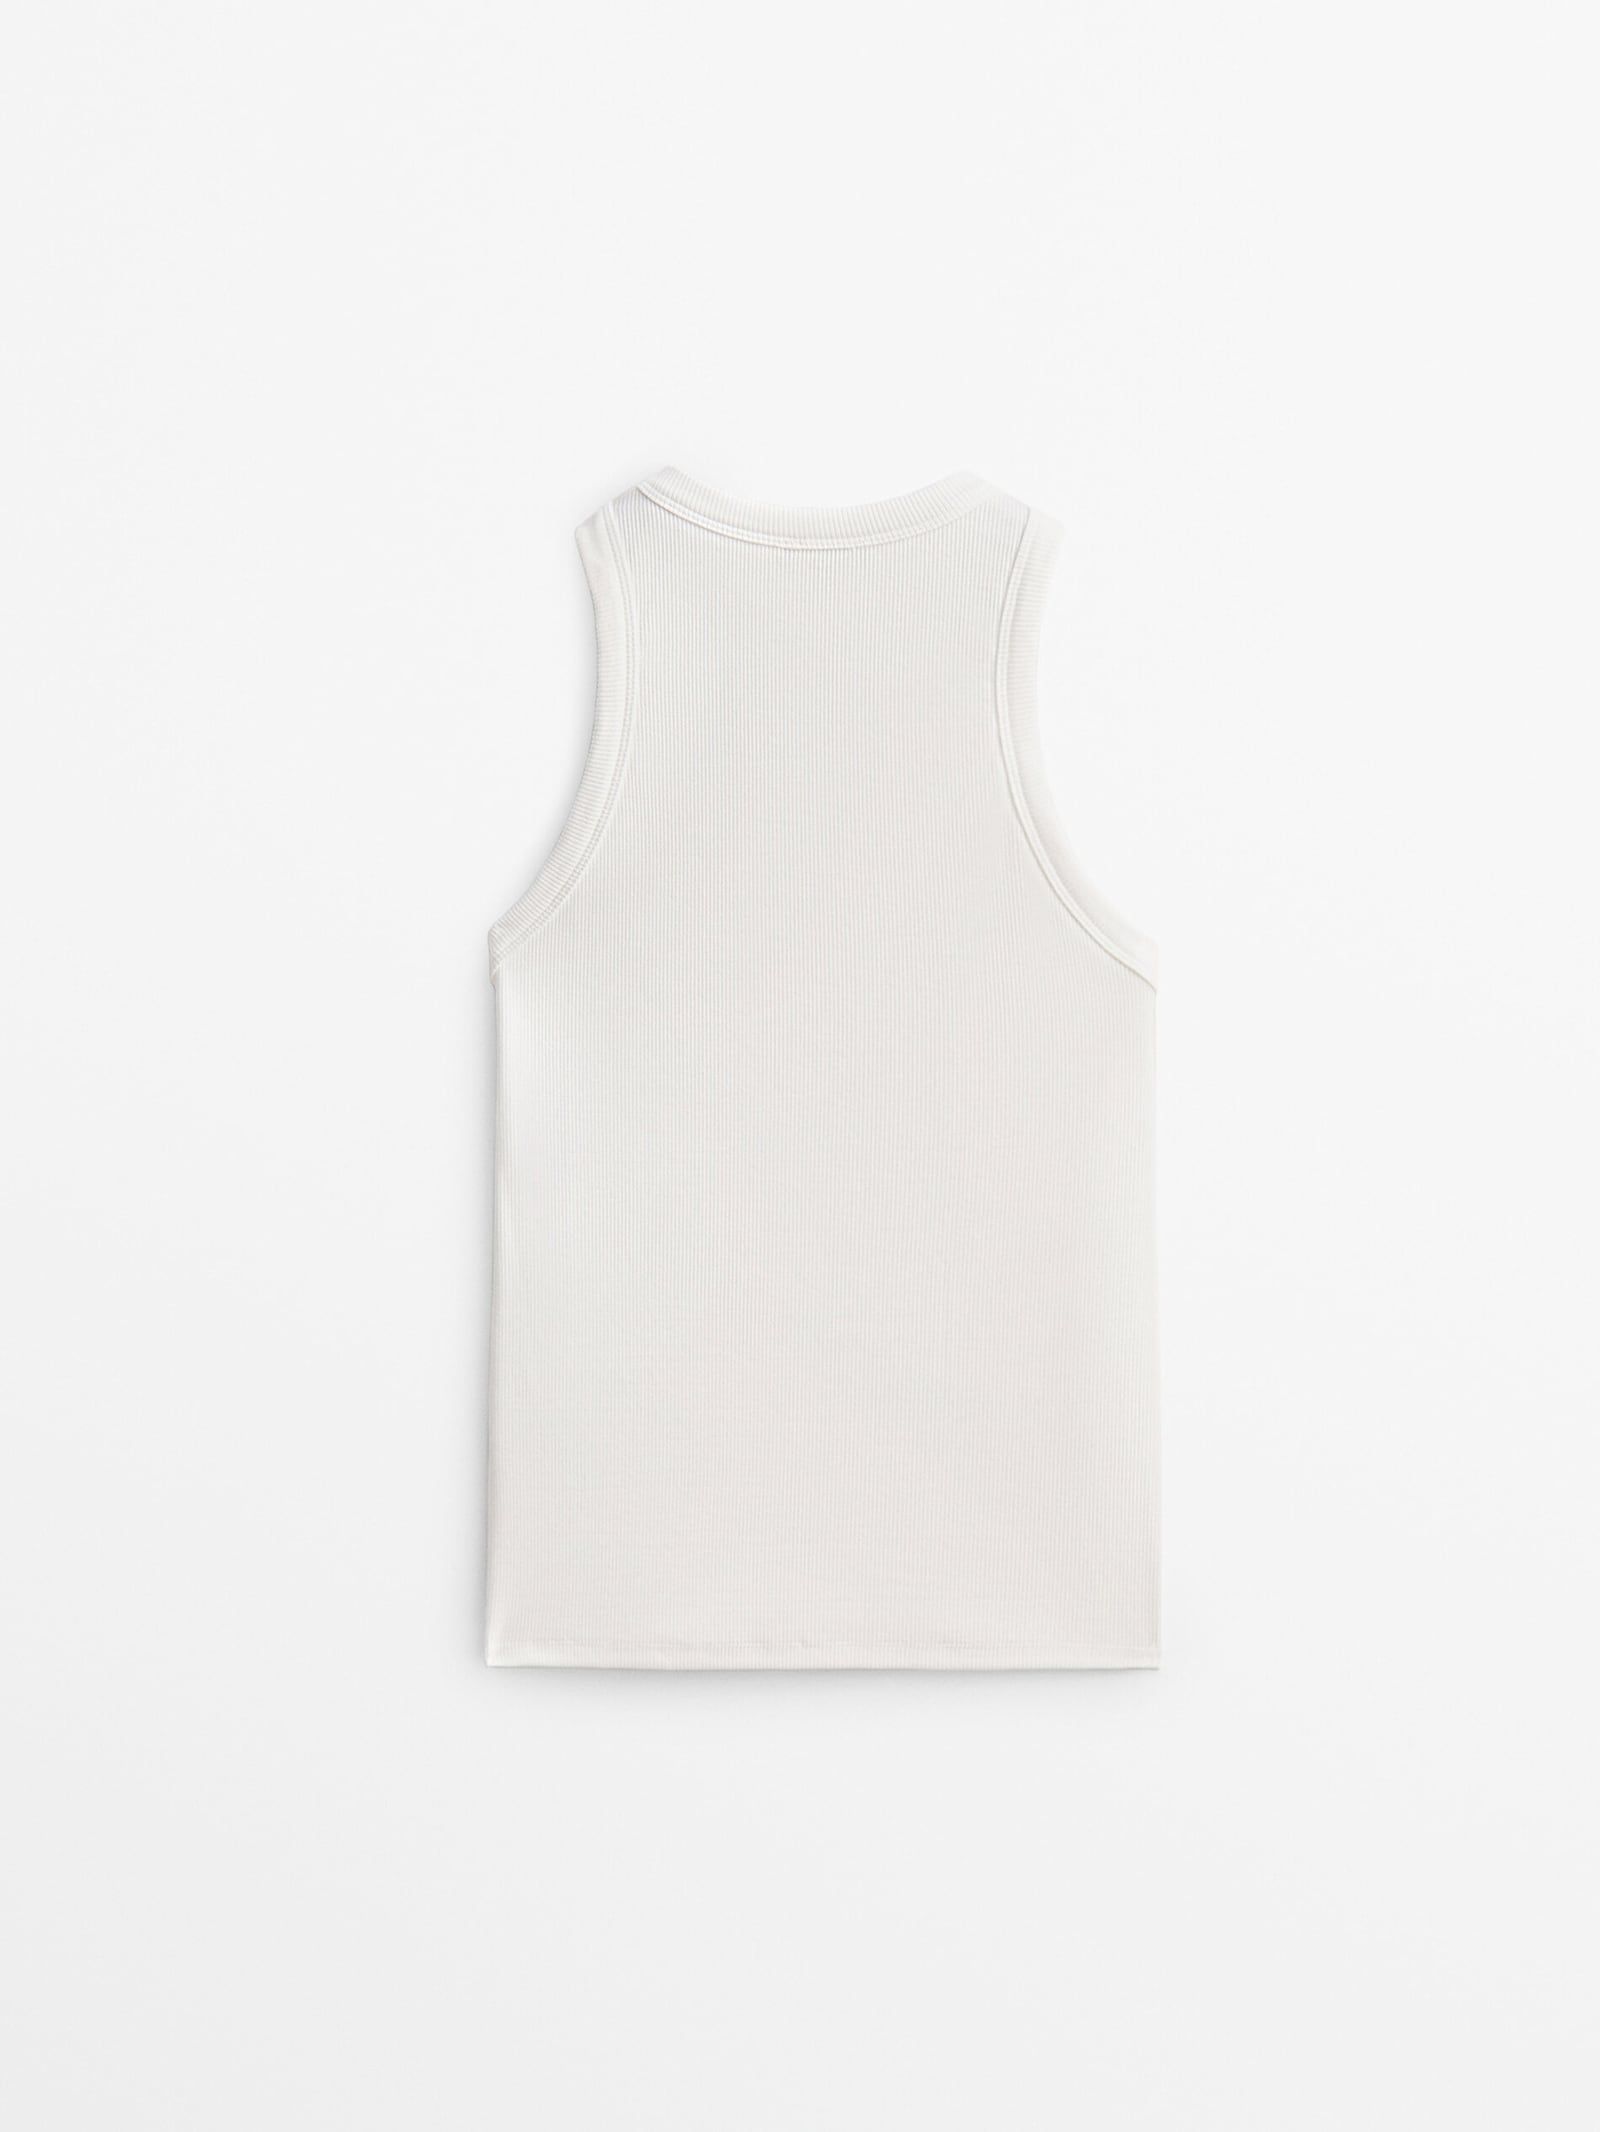 Ribbed halter top | Massimo Dutti (US)